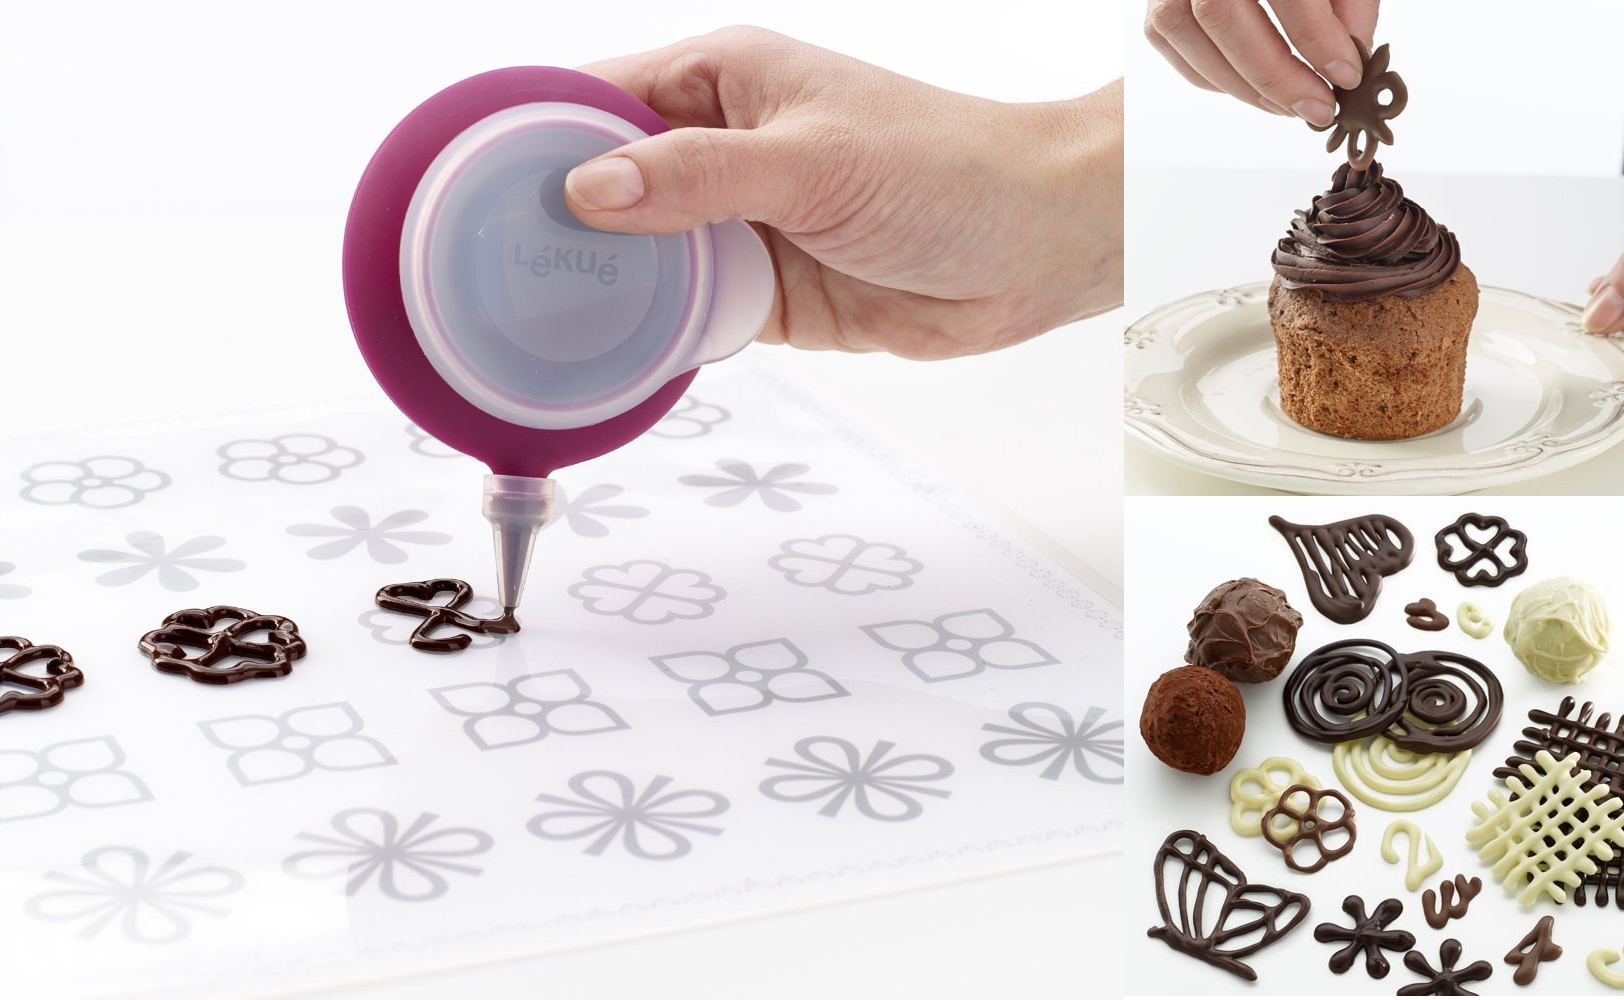 best gadgets to decorate cakes and cupcakes Decomat Decorating Kit